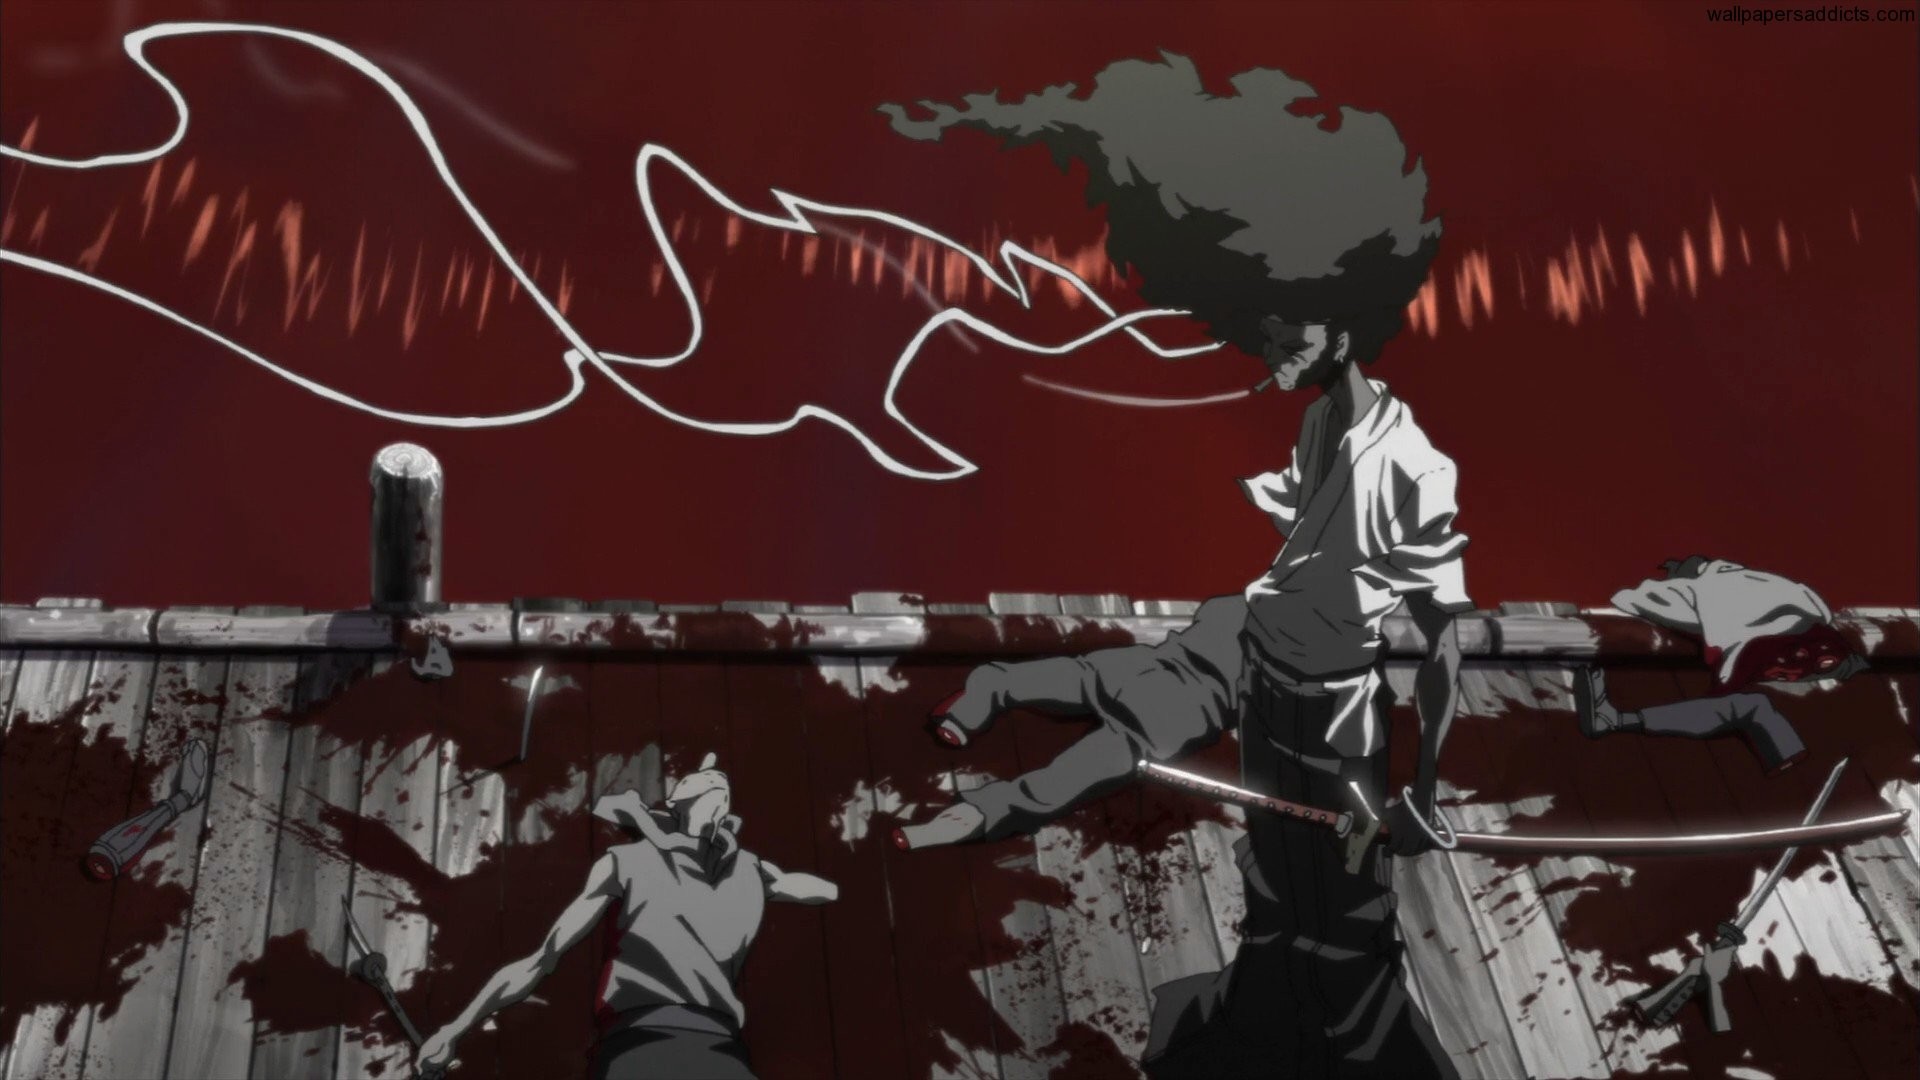 1920x1080 River of Blood - by Afro Samurai